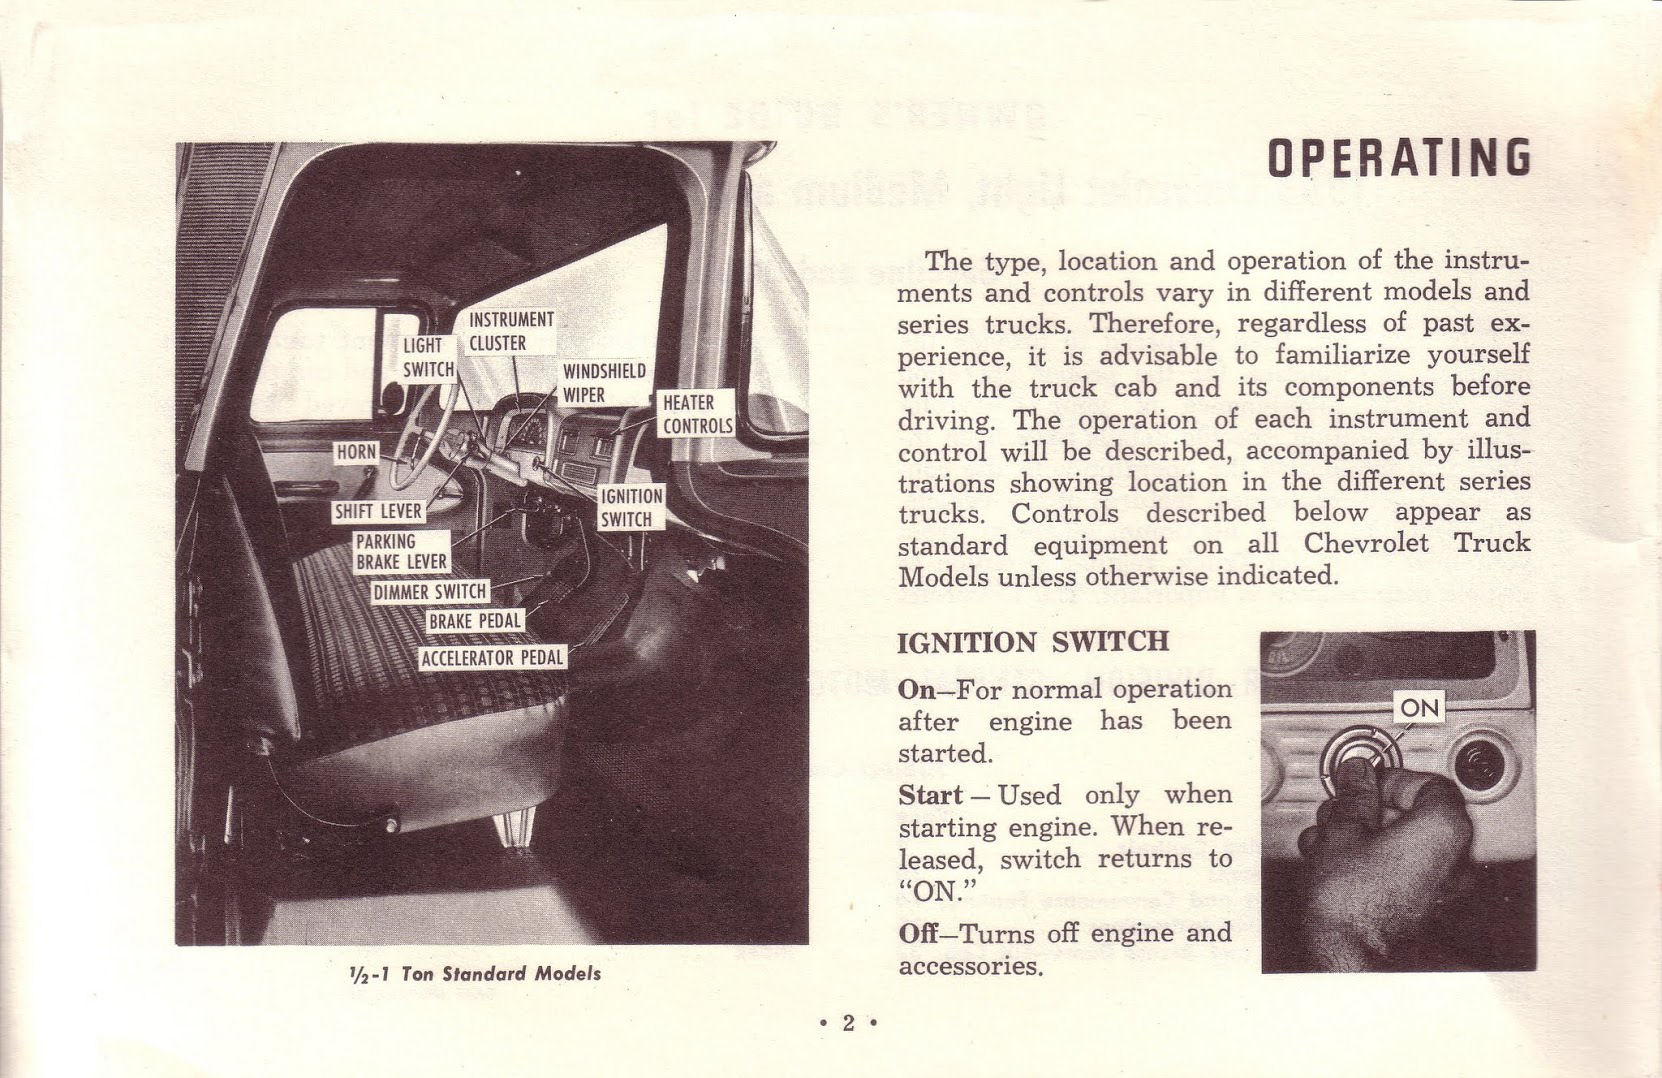 1963_Chevrolet_Truck_Owners_Guide-02